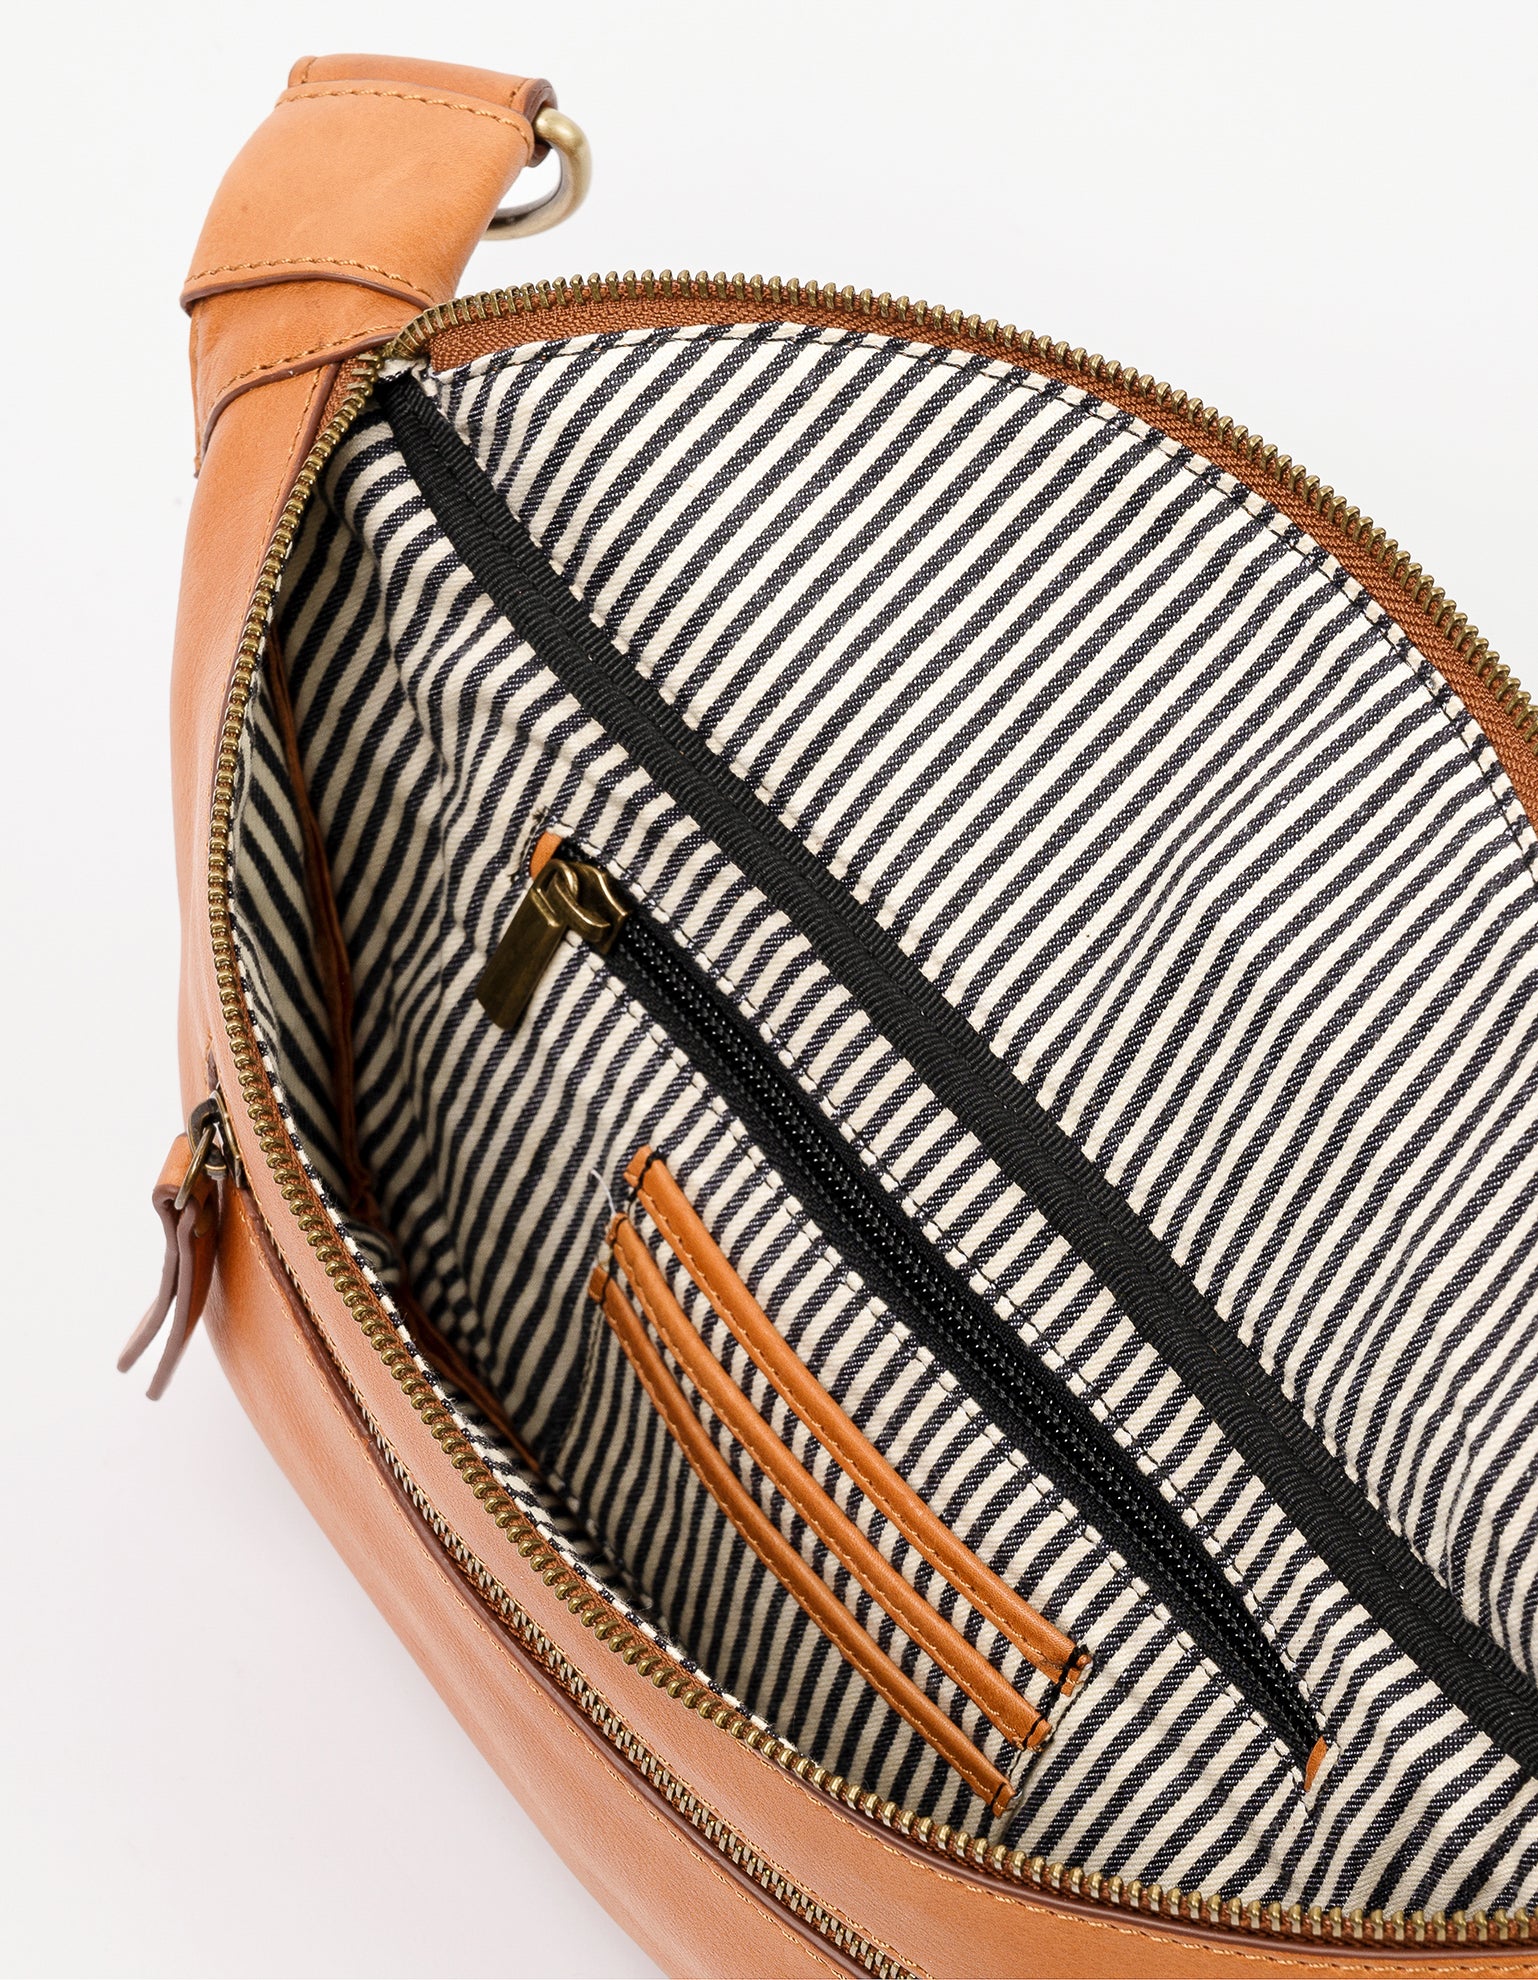 Drew Bum Bag in Wild Oak soft grain leather without strap. Inside product image.